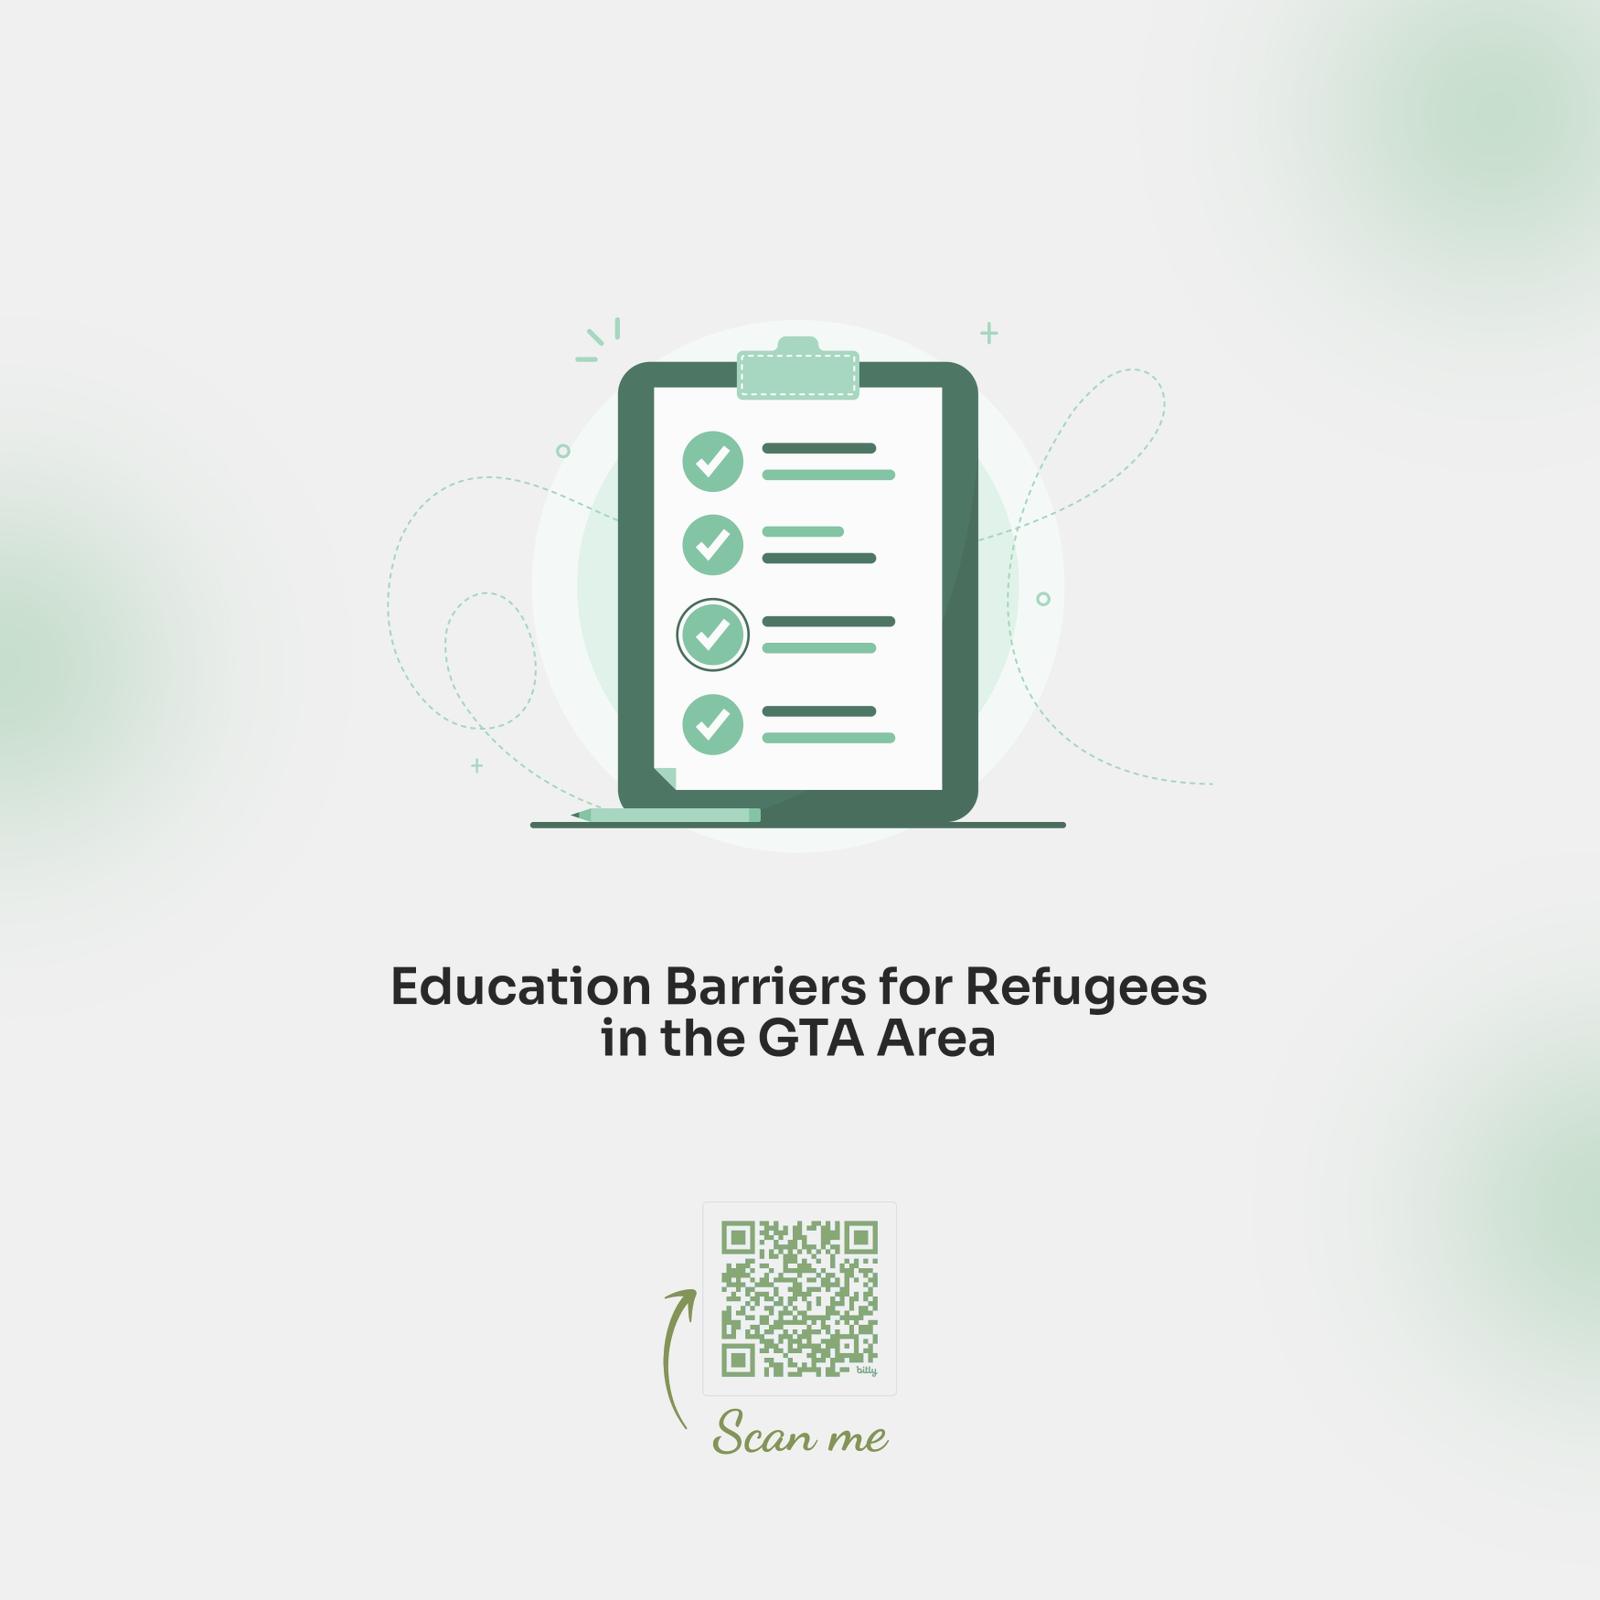 "Education Barriers for Refugees in the GTA Area"